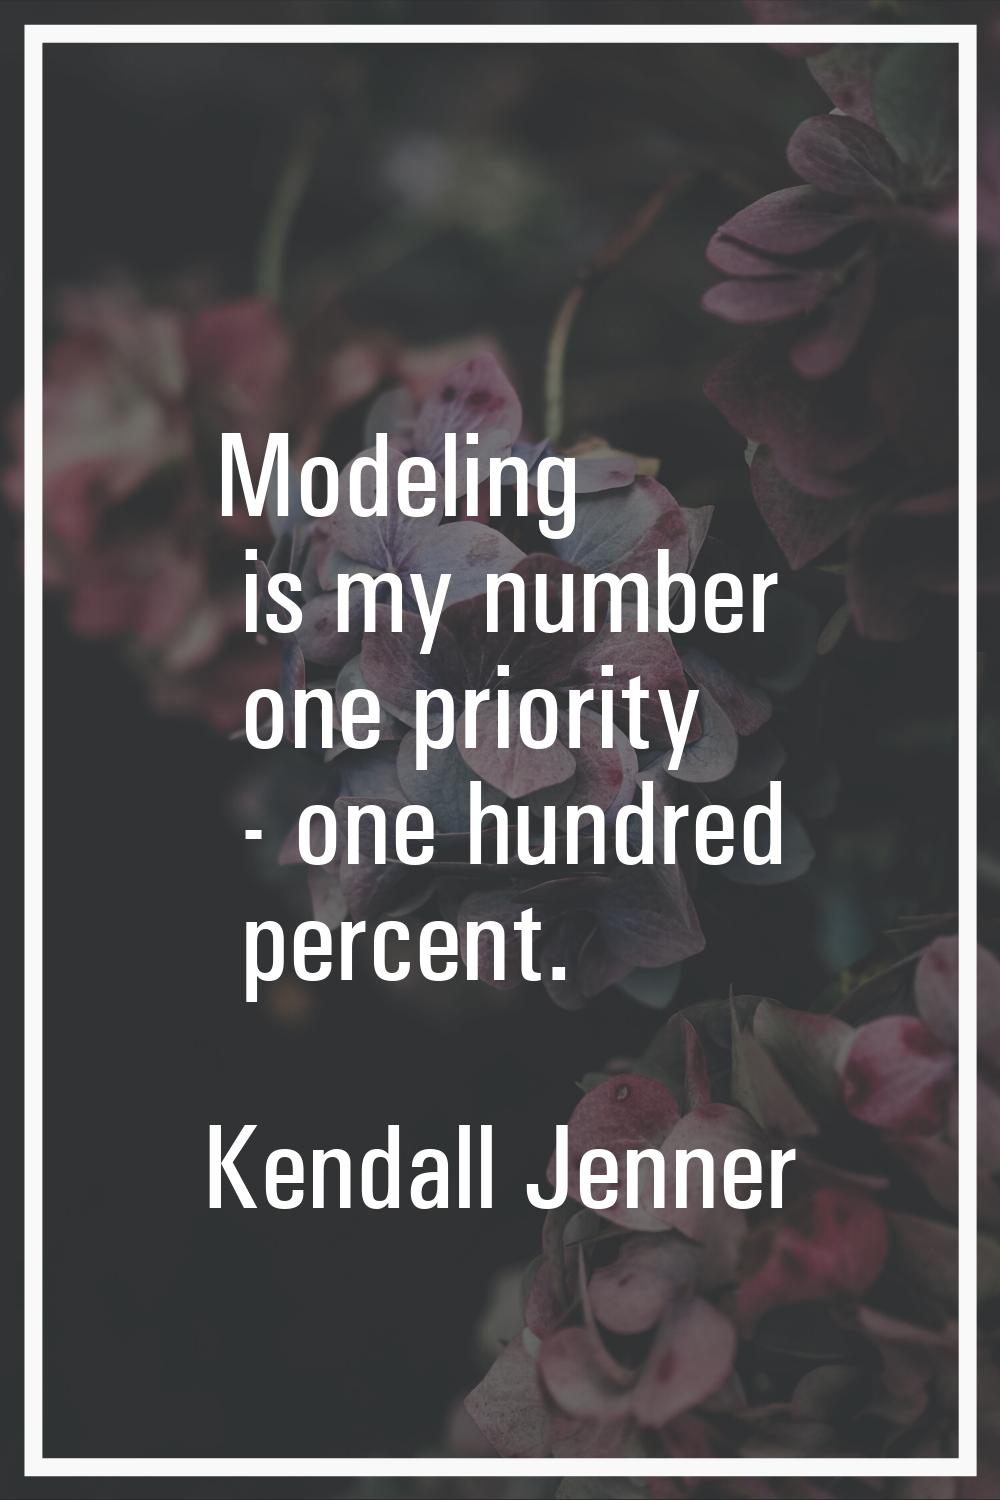 Modeling is my number one priority - one hundred percent.